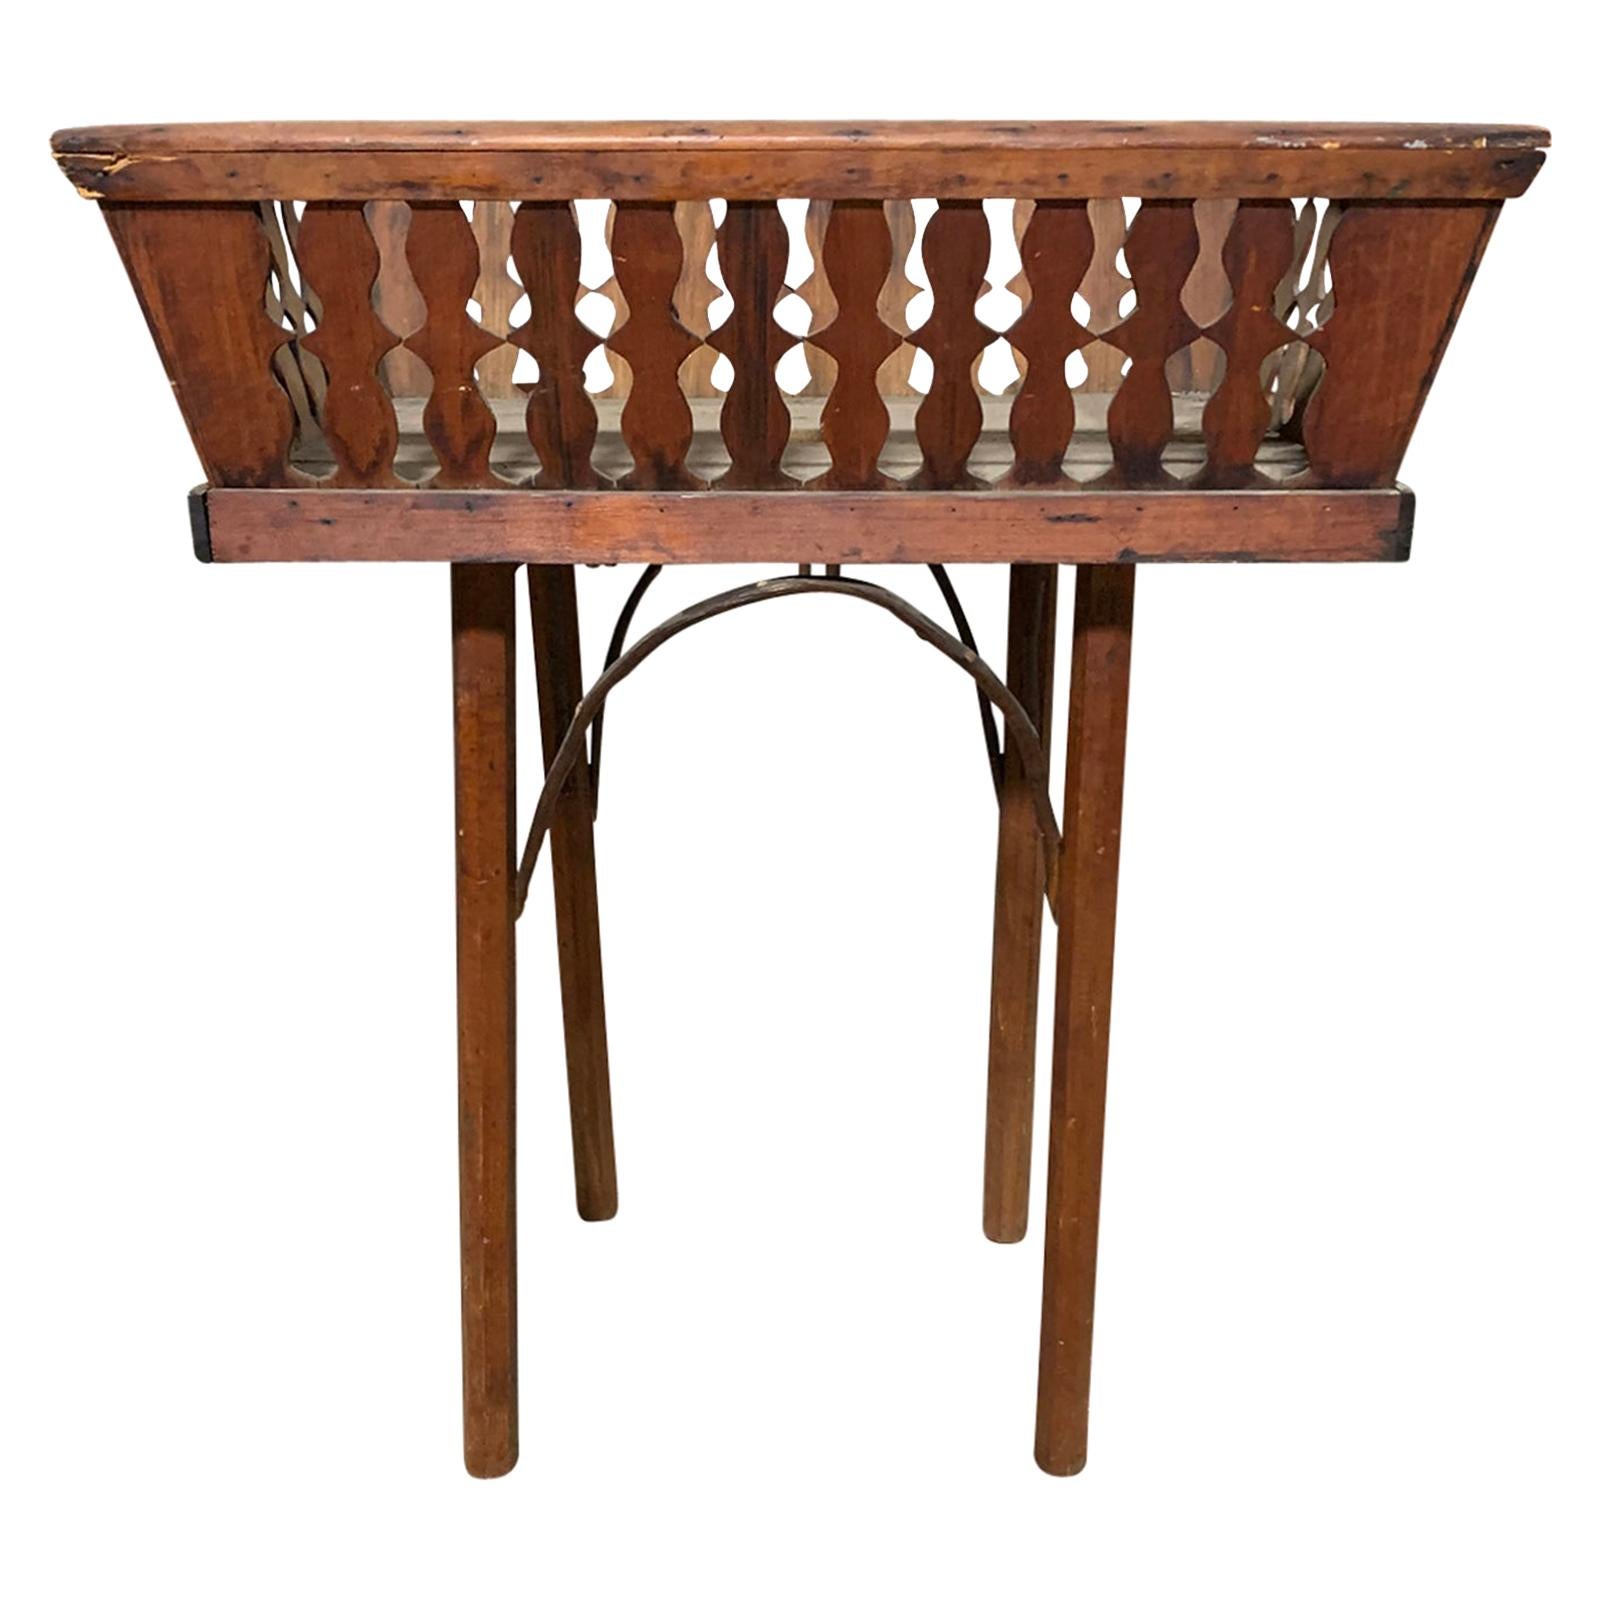 19th Century French Basket as Table